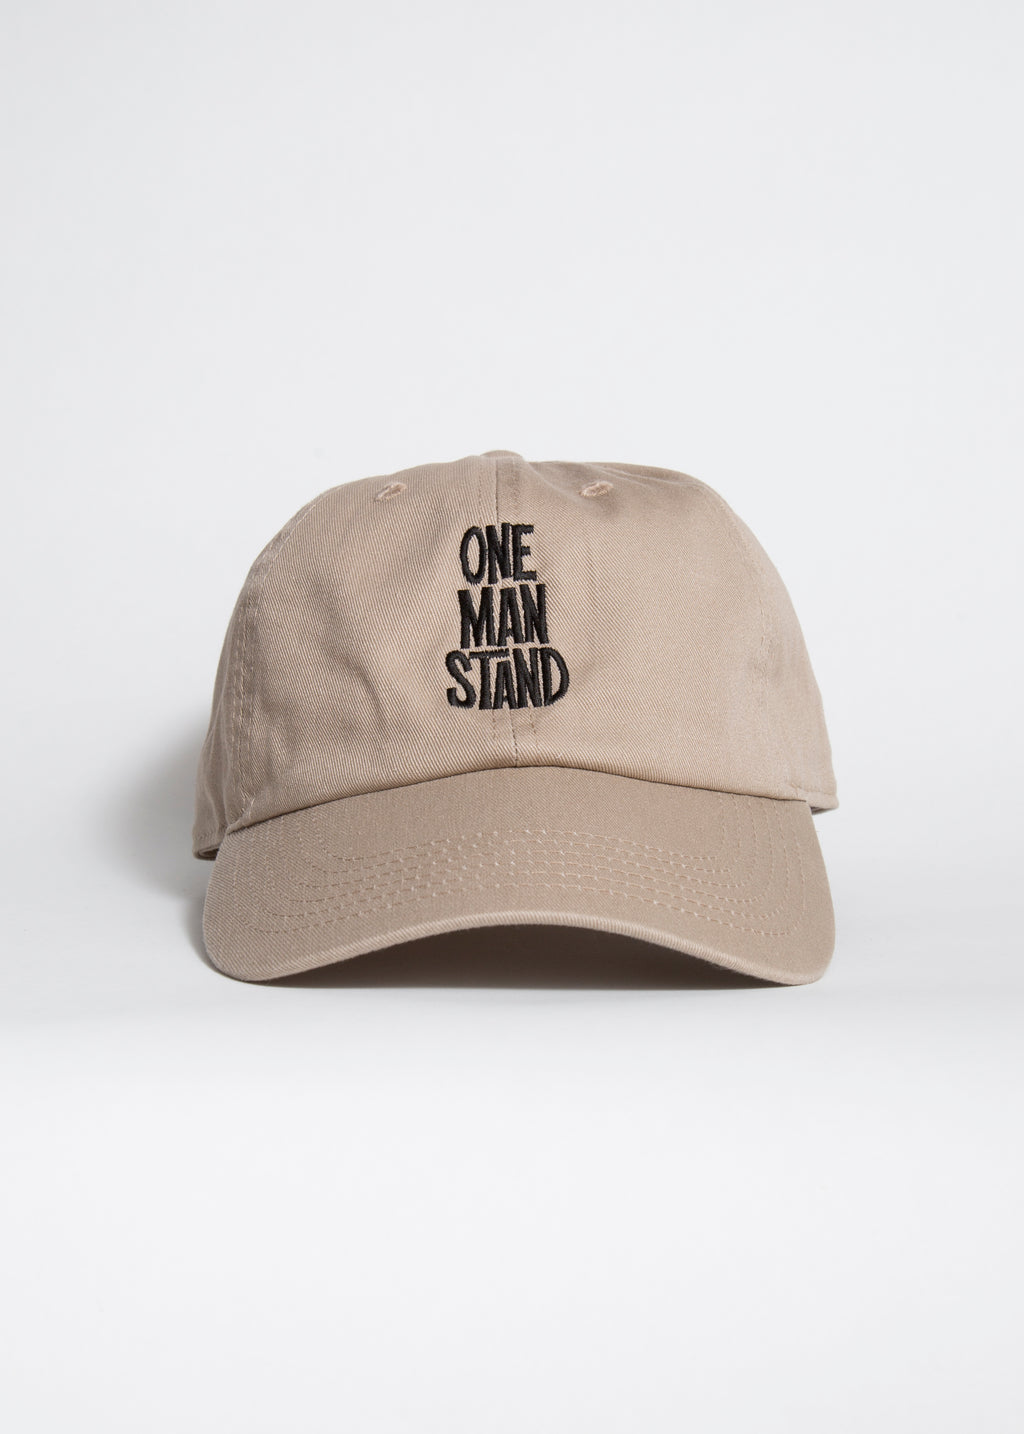 ONE MAN STAND SPRING 2019 CAP